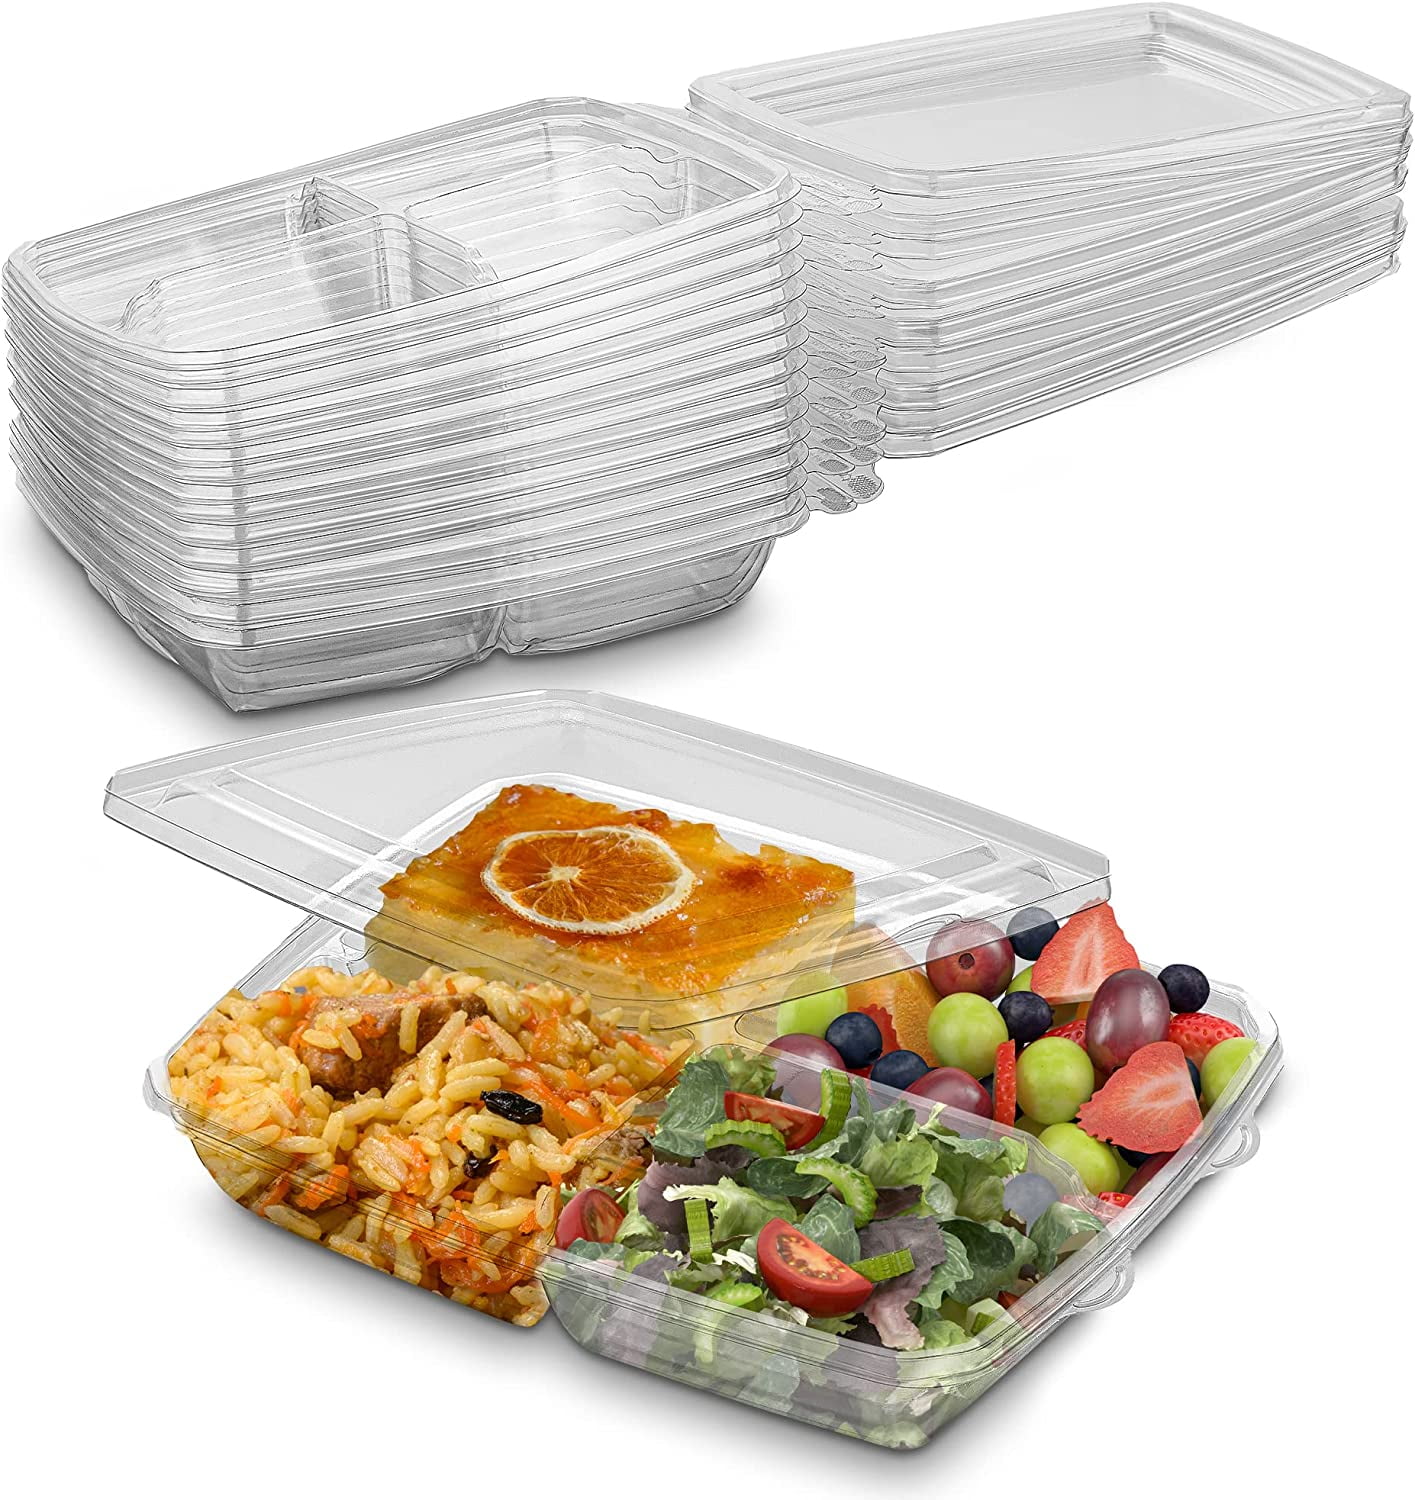  Snack Containers - 7 Pack, 4 Compartment Snack Containers, Lunchable  Container, Lunchable Containers 4 Compartments, Kids Lunch Box Containers,  Snack Containers For Adults, Lunchables Containers: Home & Kitchen